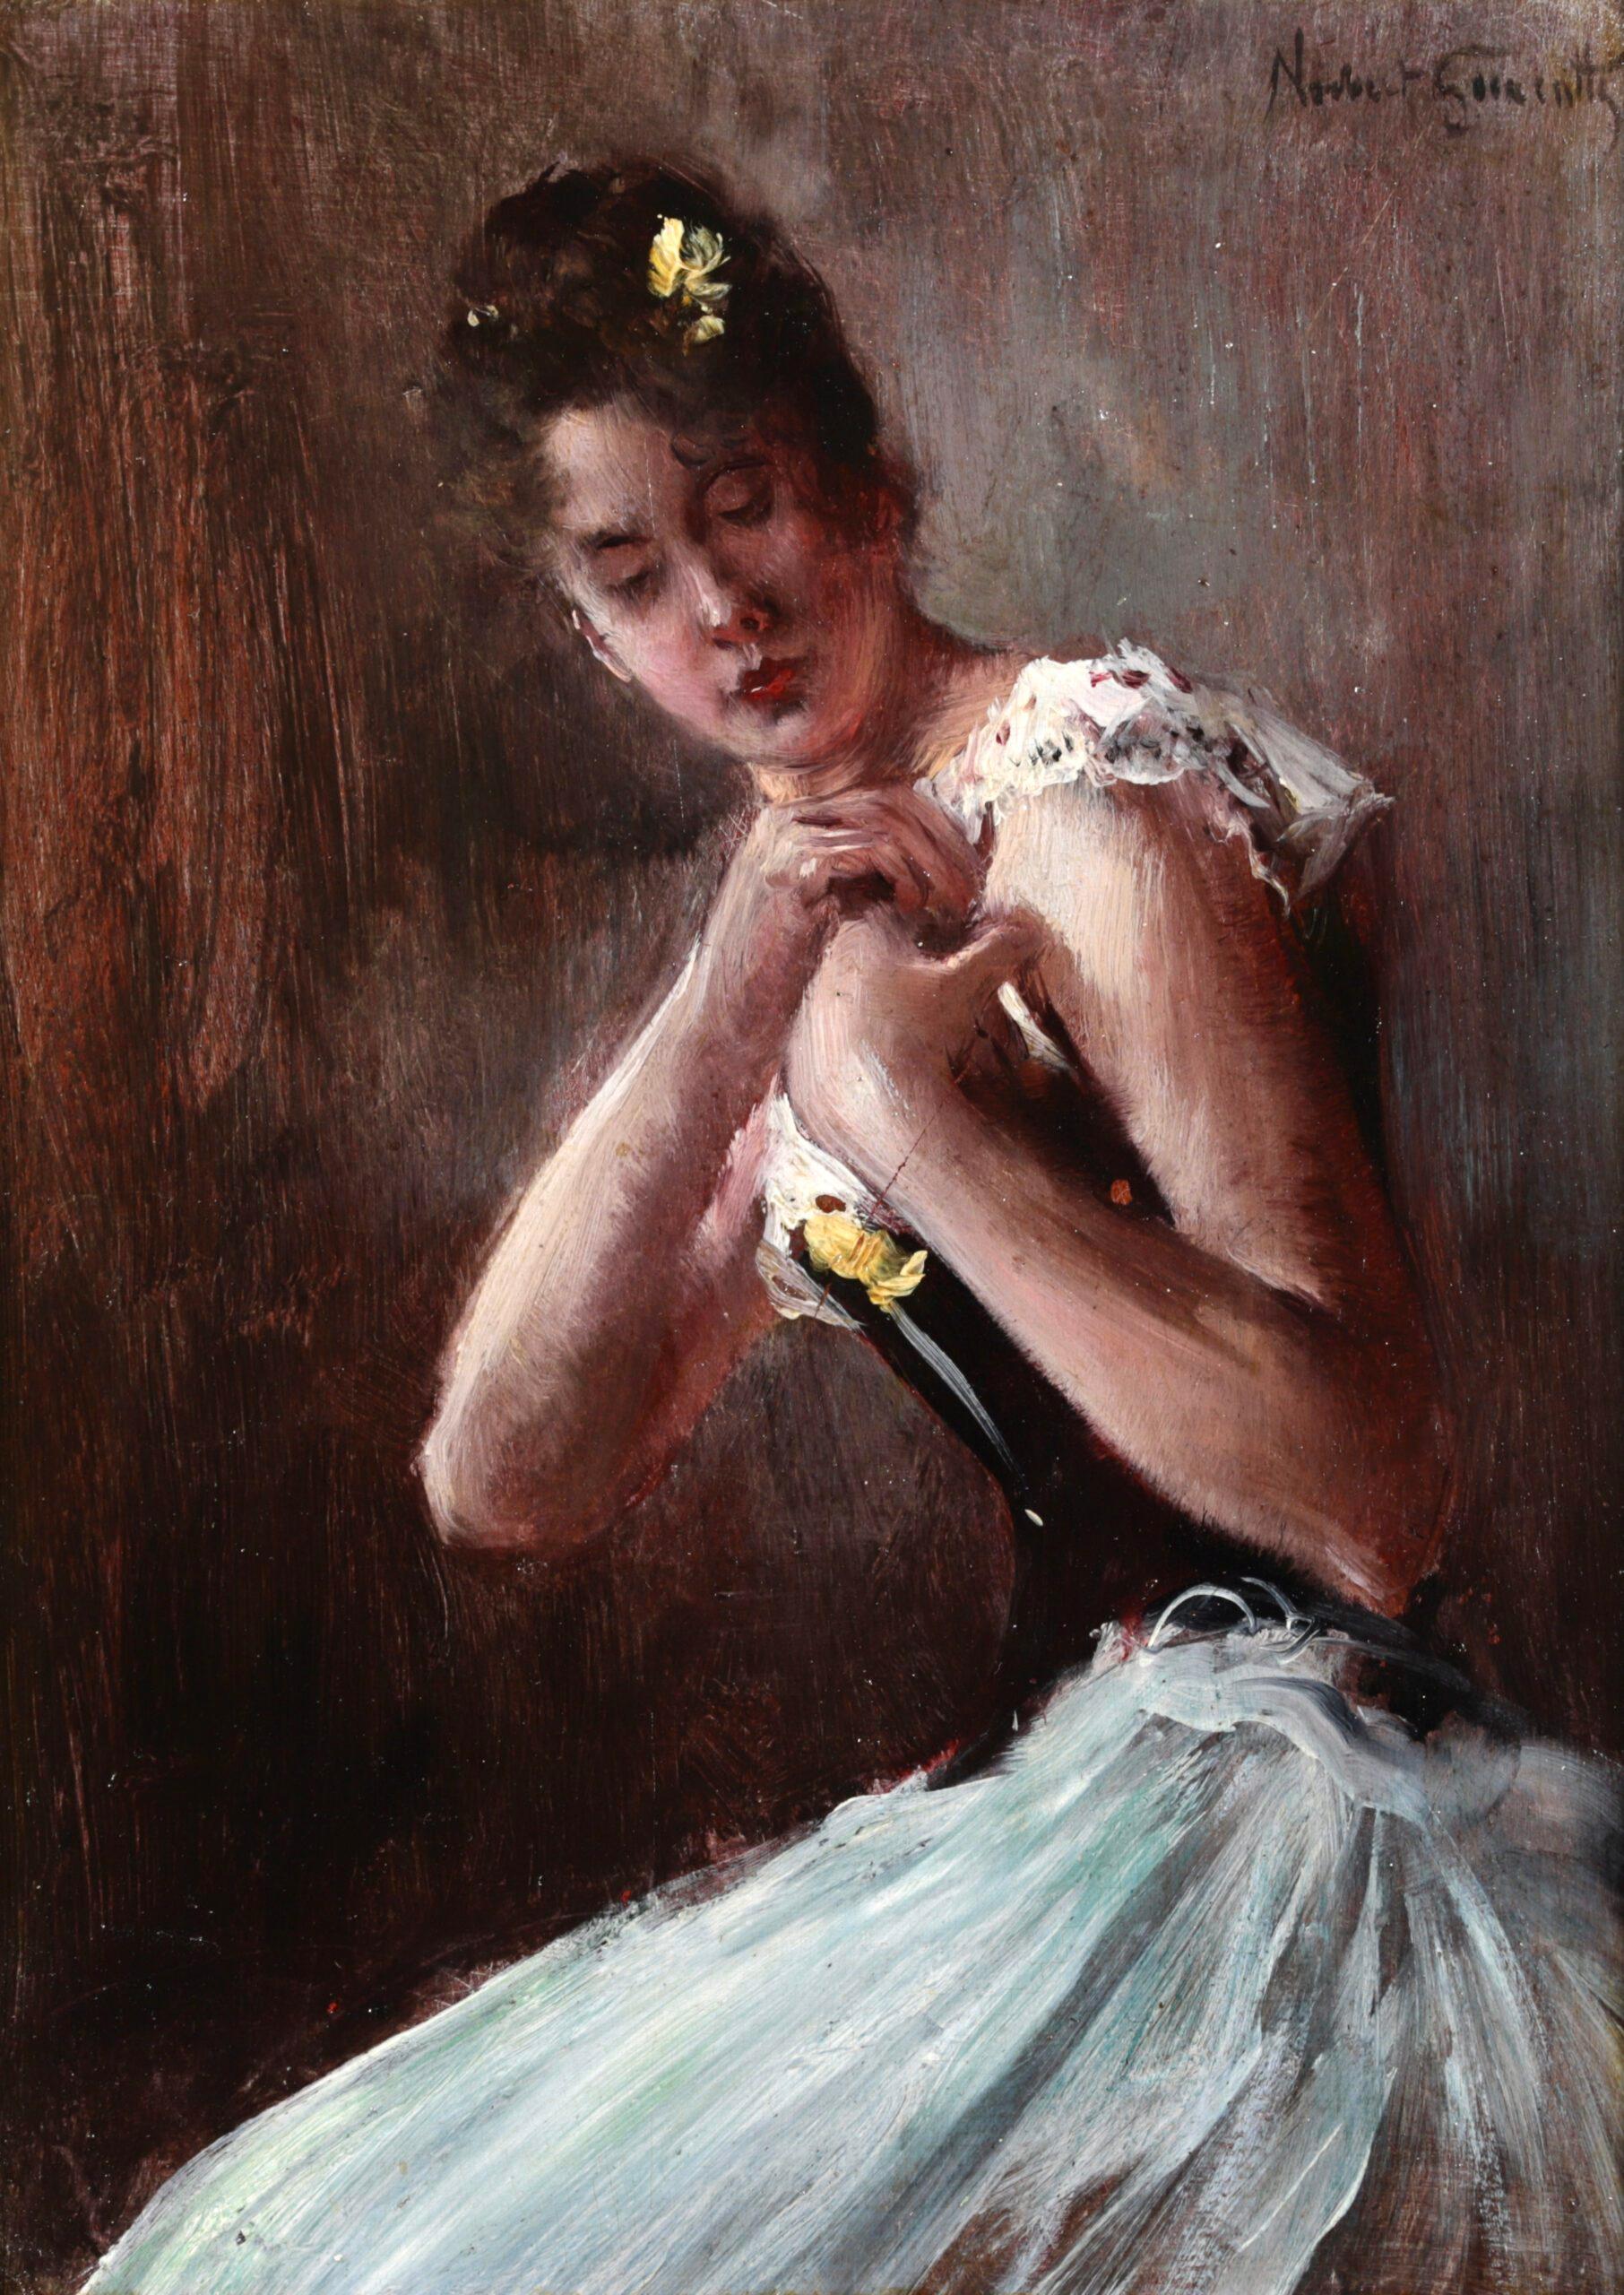 Signed, titled and dated figurative oil on panel by French impressionist painter Norbert Goeneutte. The work depicts an elegant seated dancer getting dressed. She is wearing a dress with a black corset trimmed with yellow flowers around the bust and